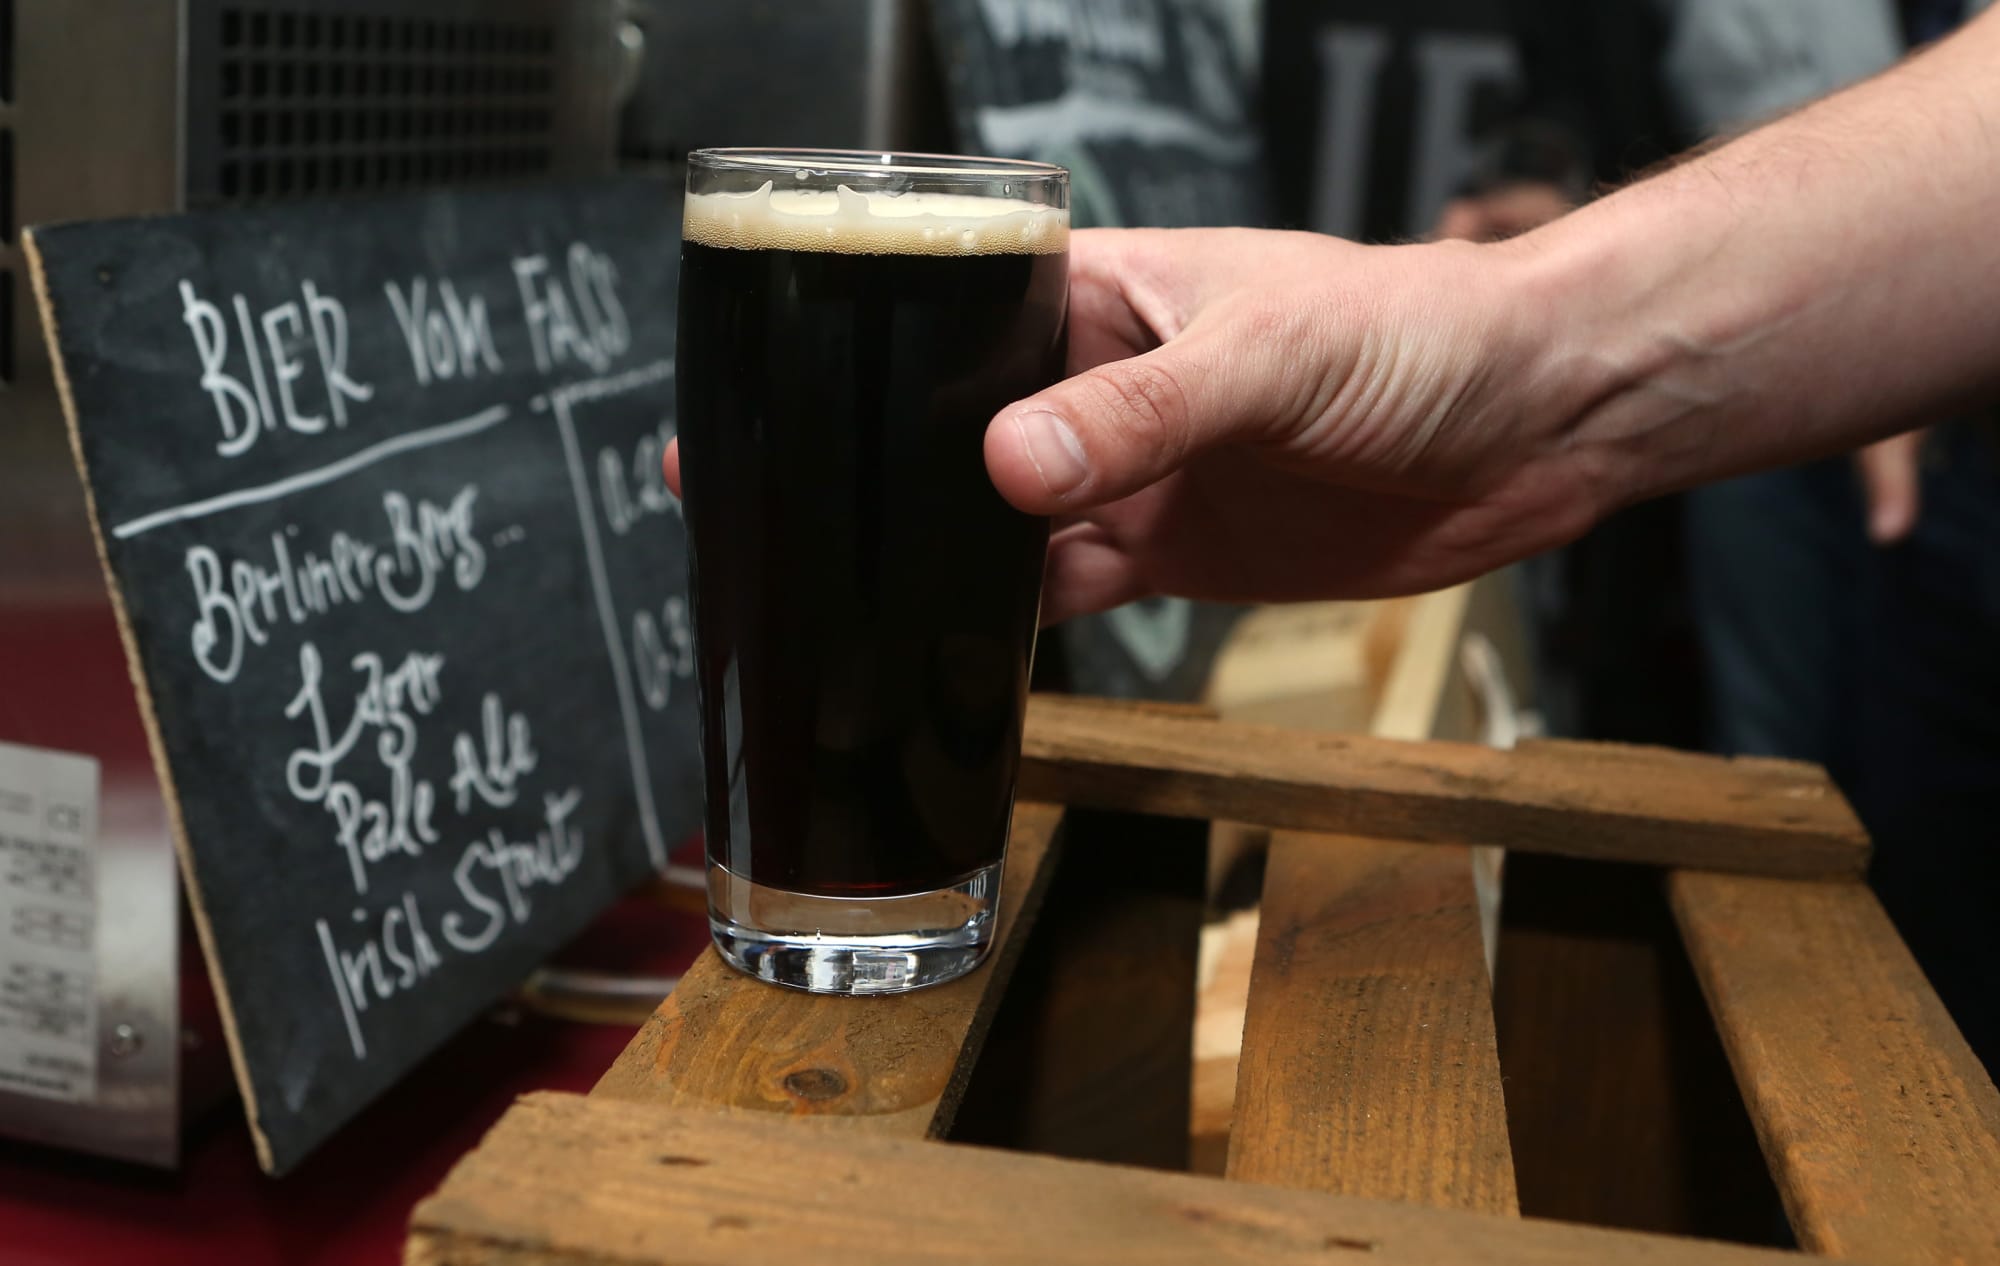 National Stout Day is a reason to discover the beer’s flavor diversity